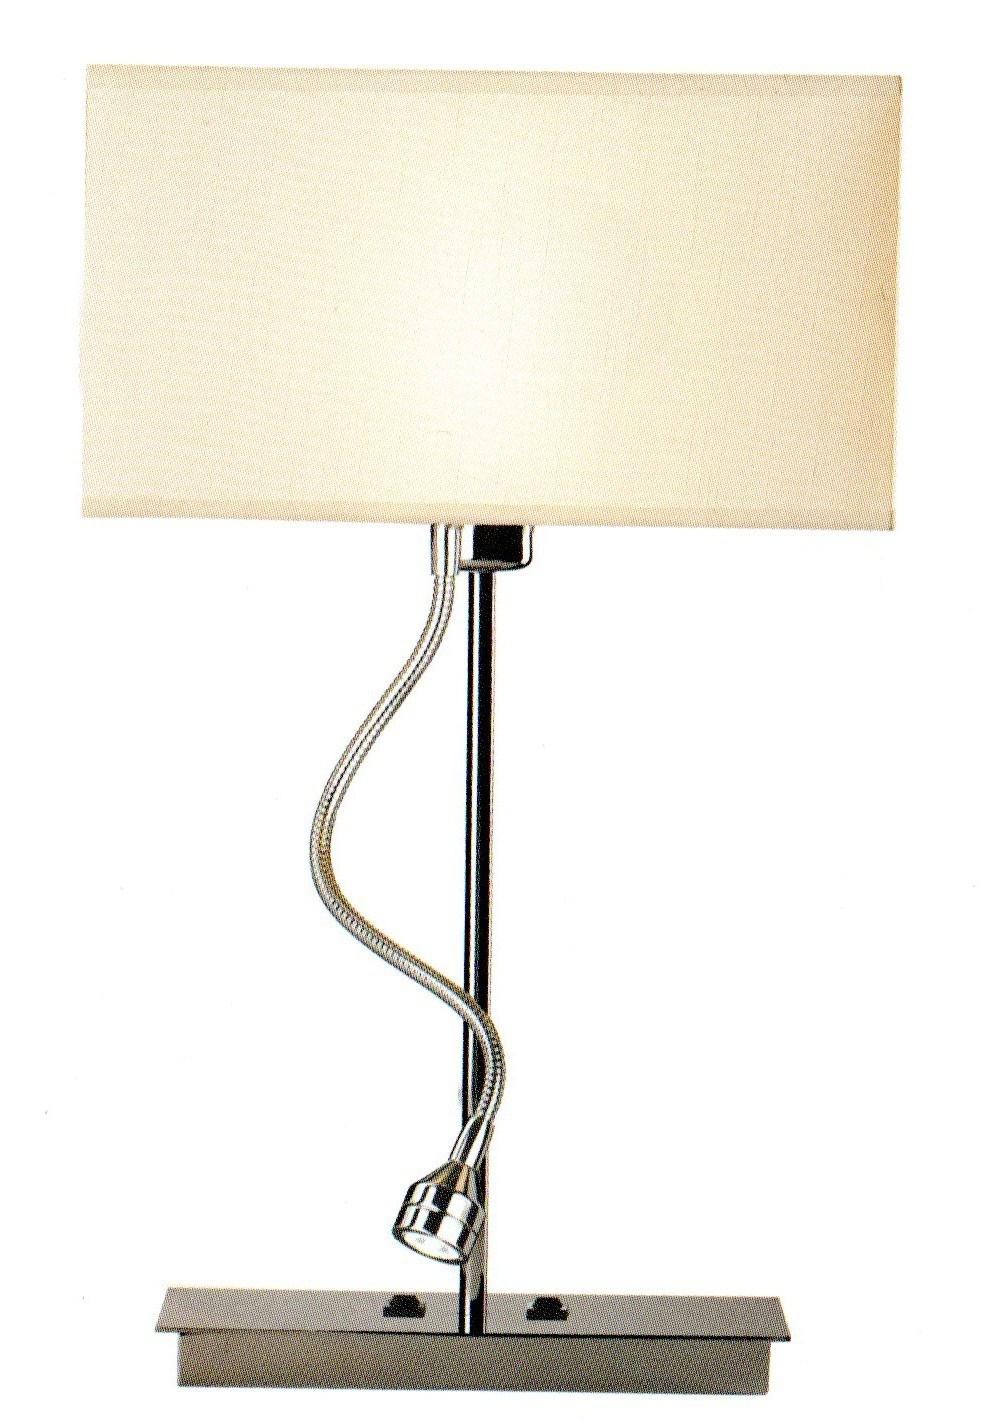 bedside table reading lamps